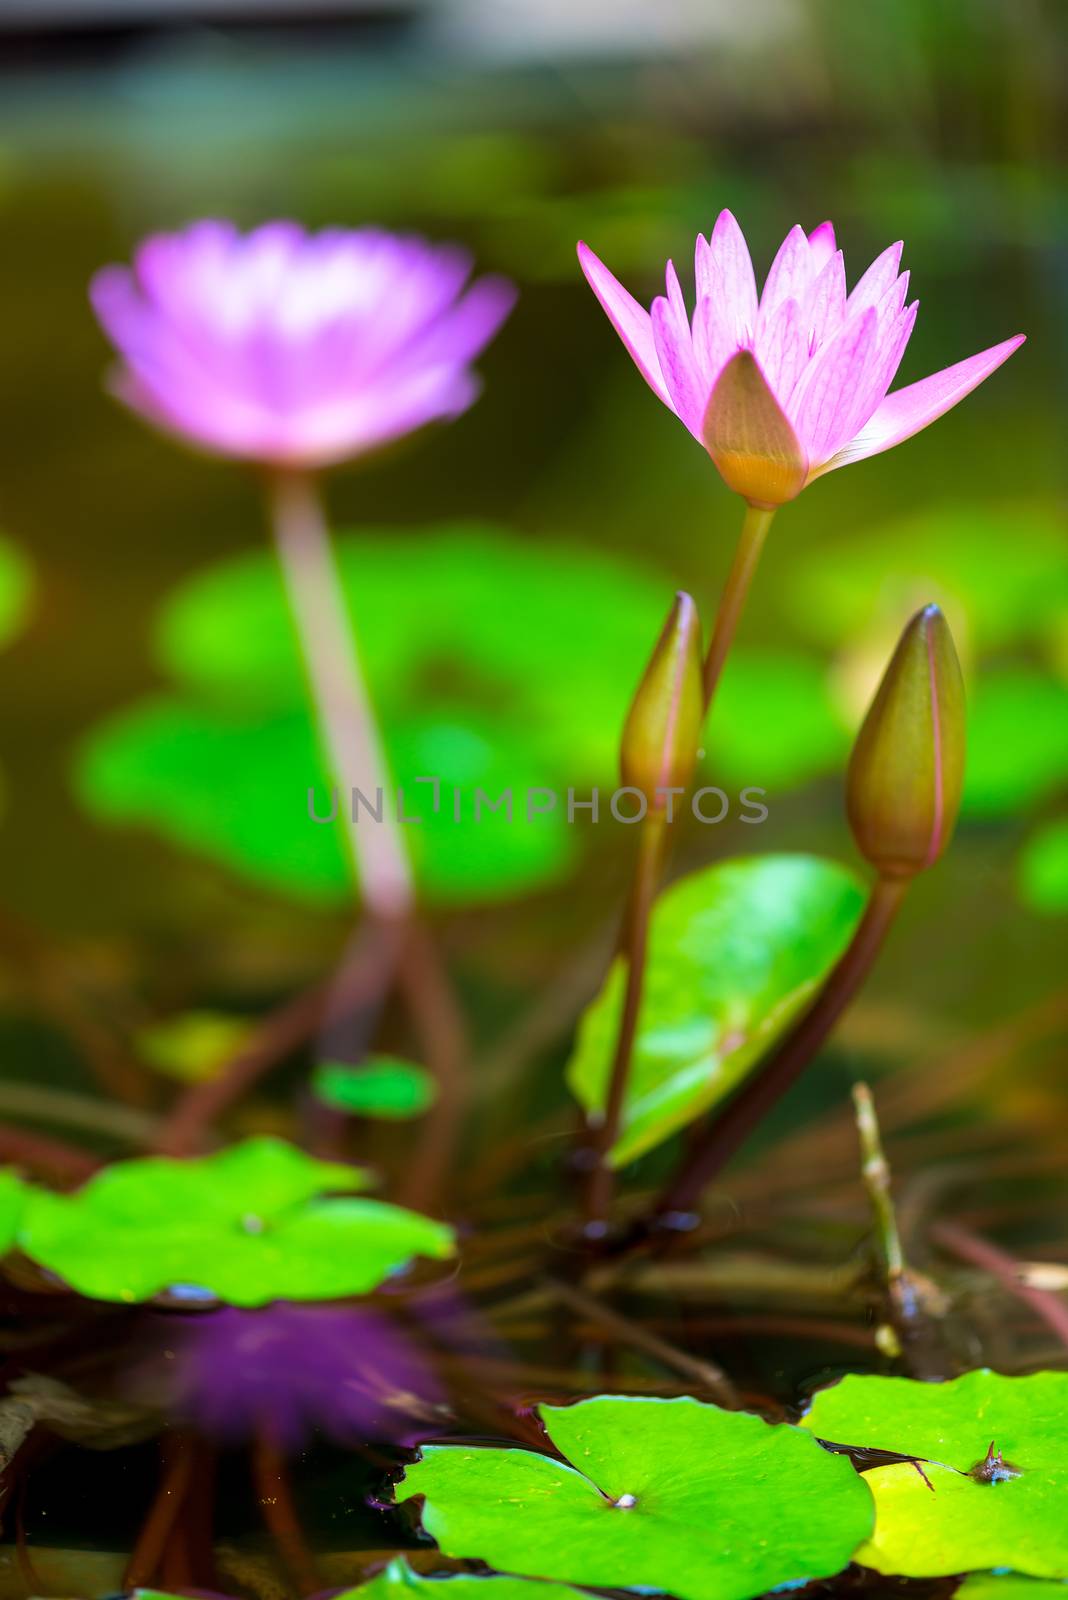 Flowers of a beautiful lilac lily close-up in a pond